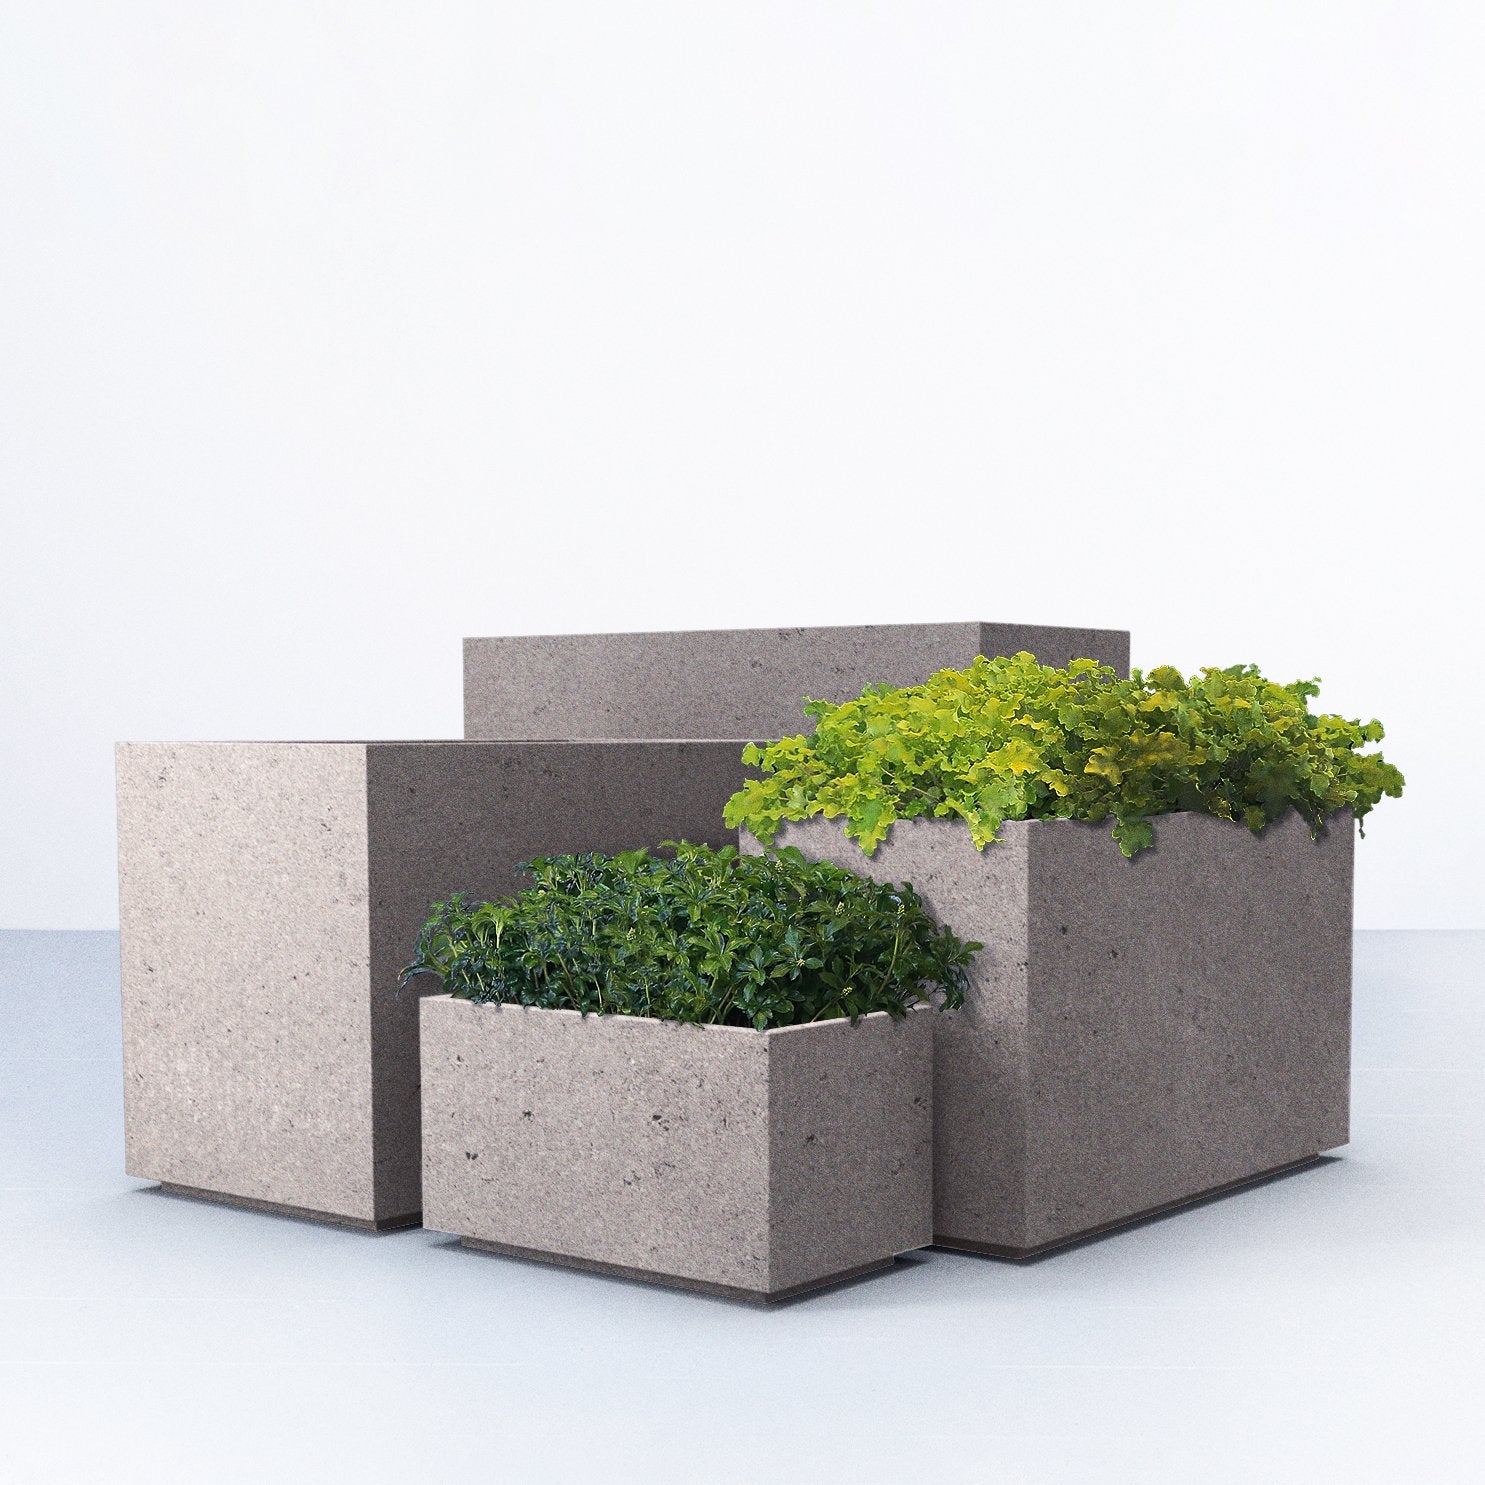 Four concrete planters with white background